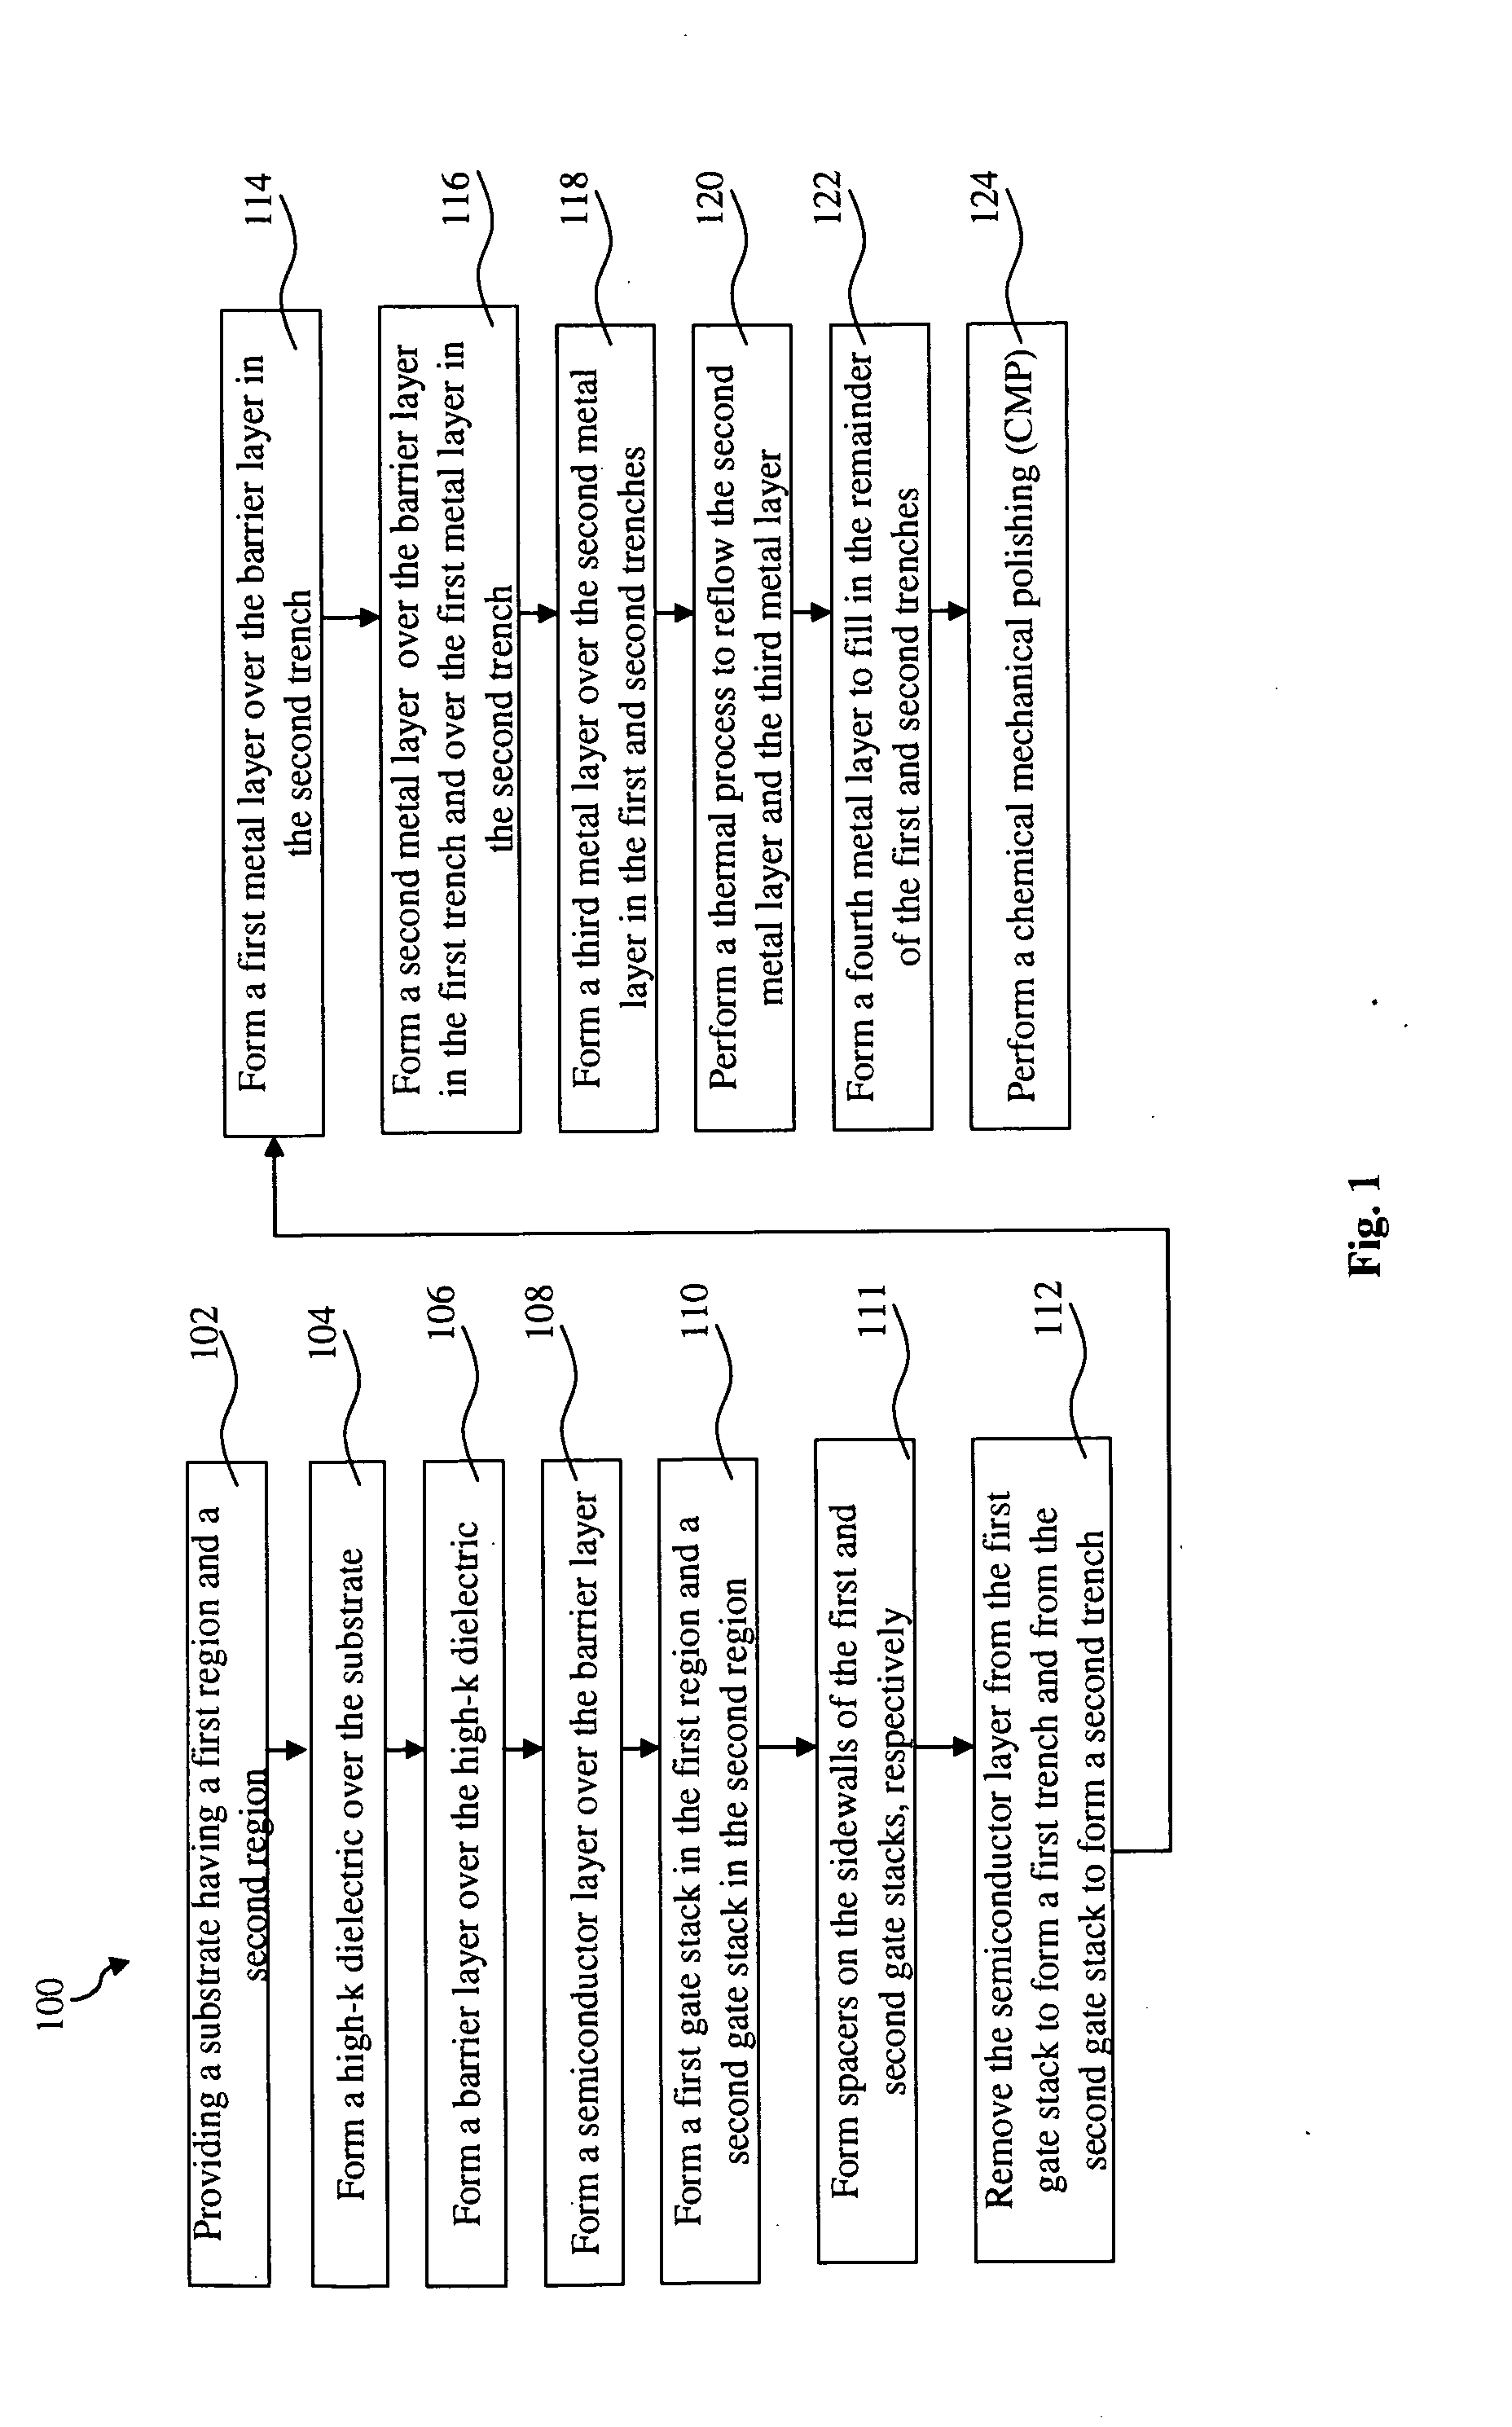 Method for tuning a work function of high-k metal gate devices